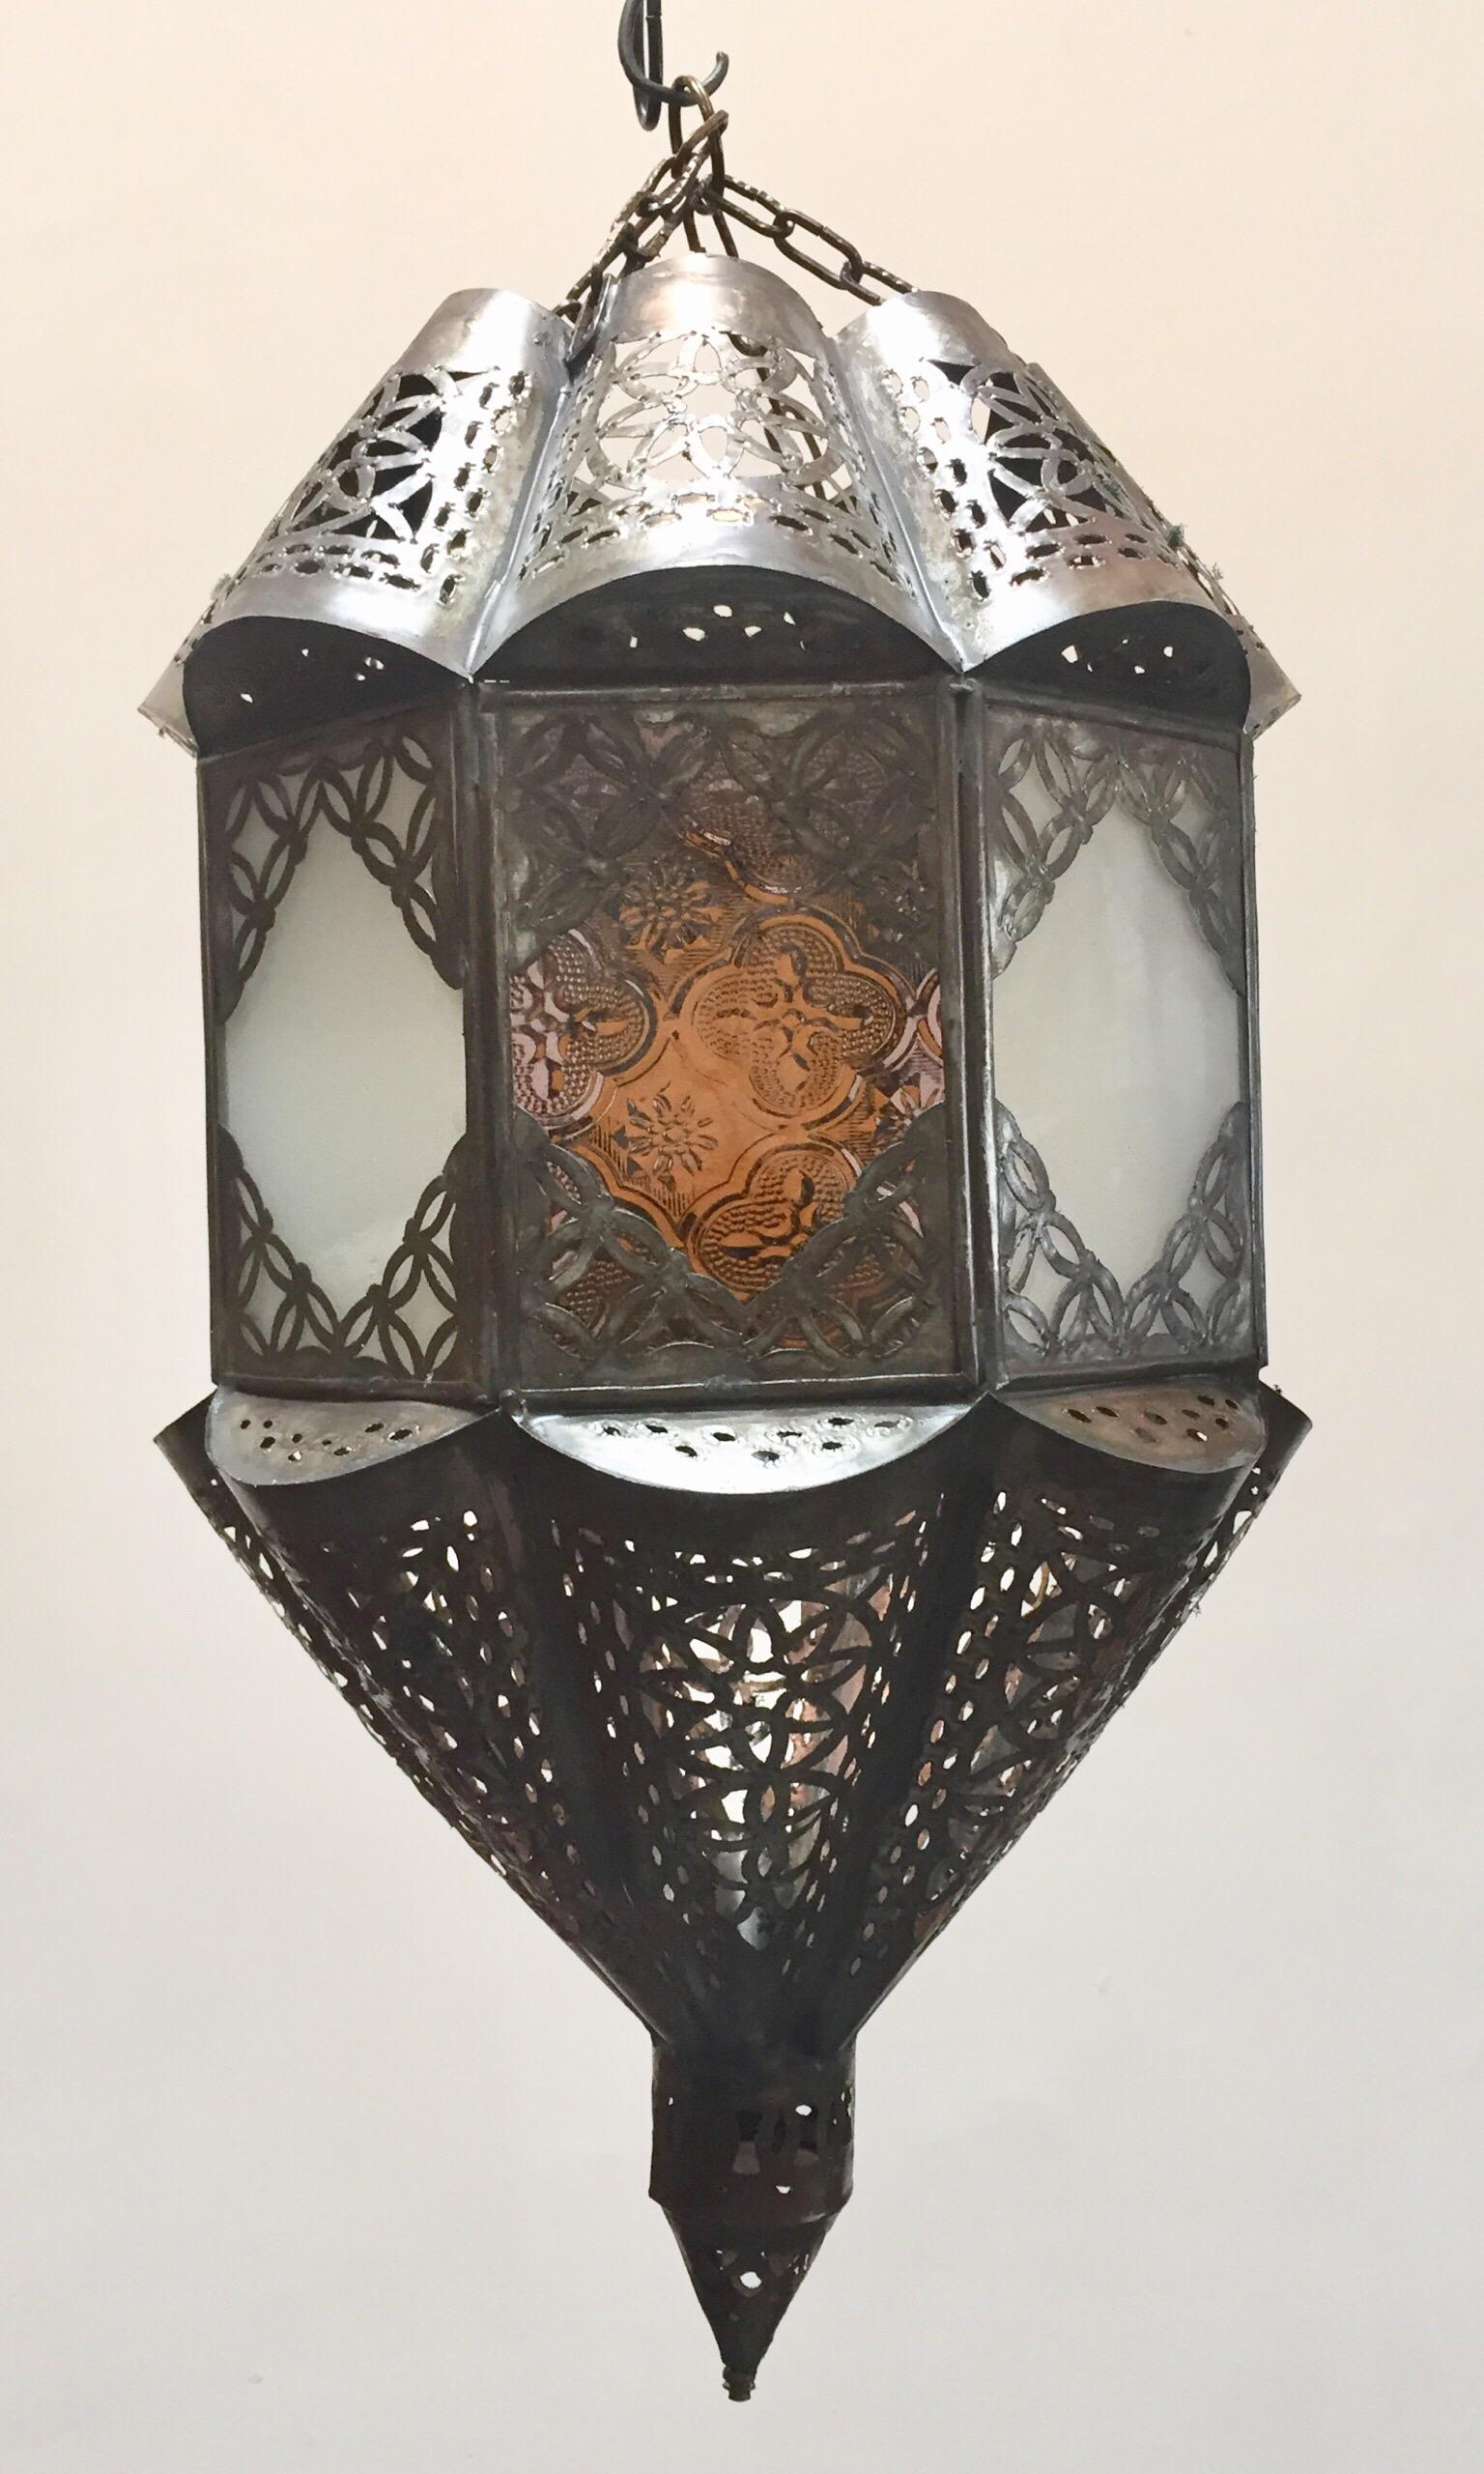 Hand-Crafted Moroccan Lantern Handcrafted Moorish Metal and Glass For Sale